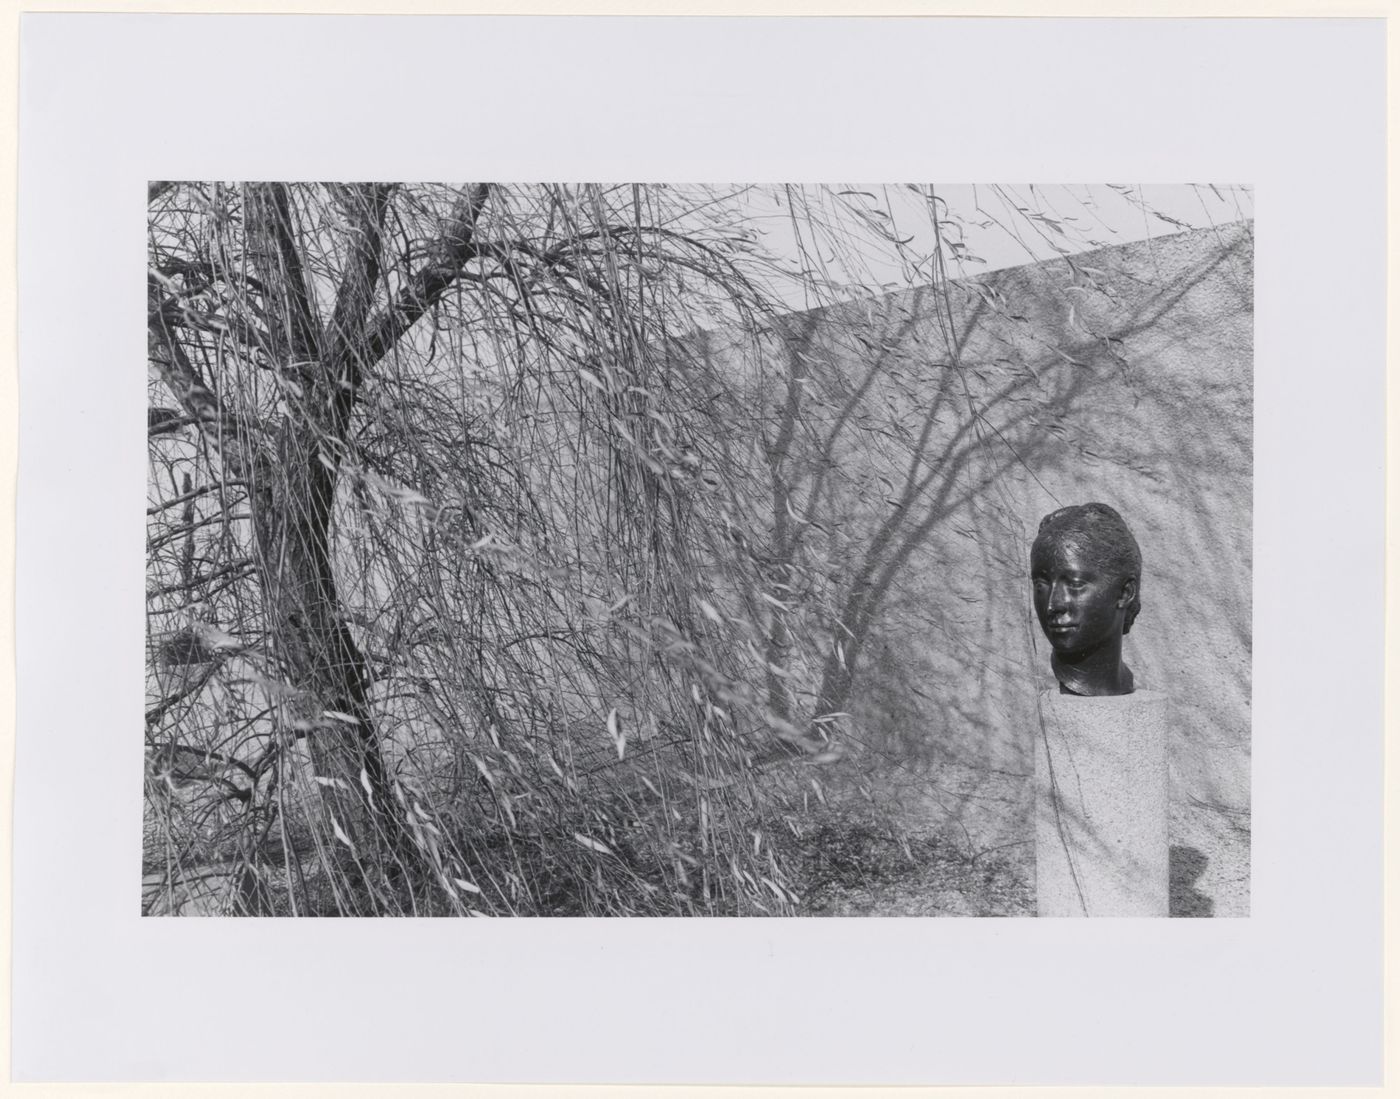 Close-up view of a sculpture, Hirshhorn Sculpture Garden, Washington, D.C., United States, from volume one of two "The Hirshhorn Museum Sculpture Garden, Washington, D.C., Fifty-two photographs, 1975-1977 by Lee Friedlander, Haywire Press, New York"